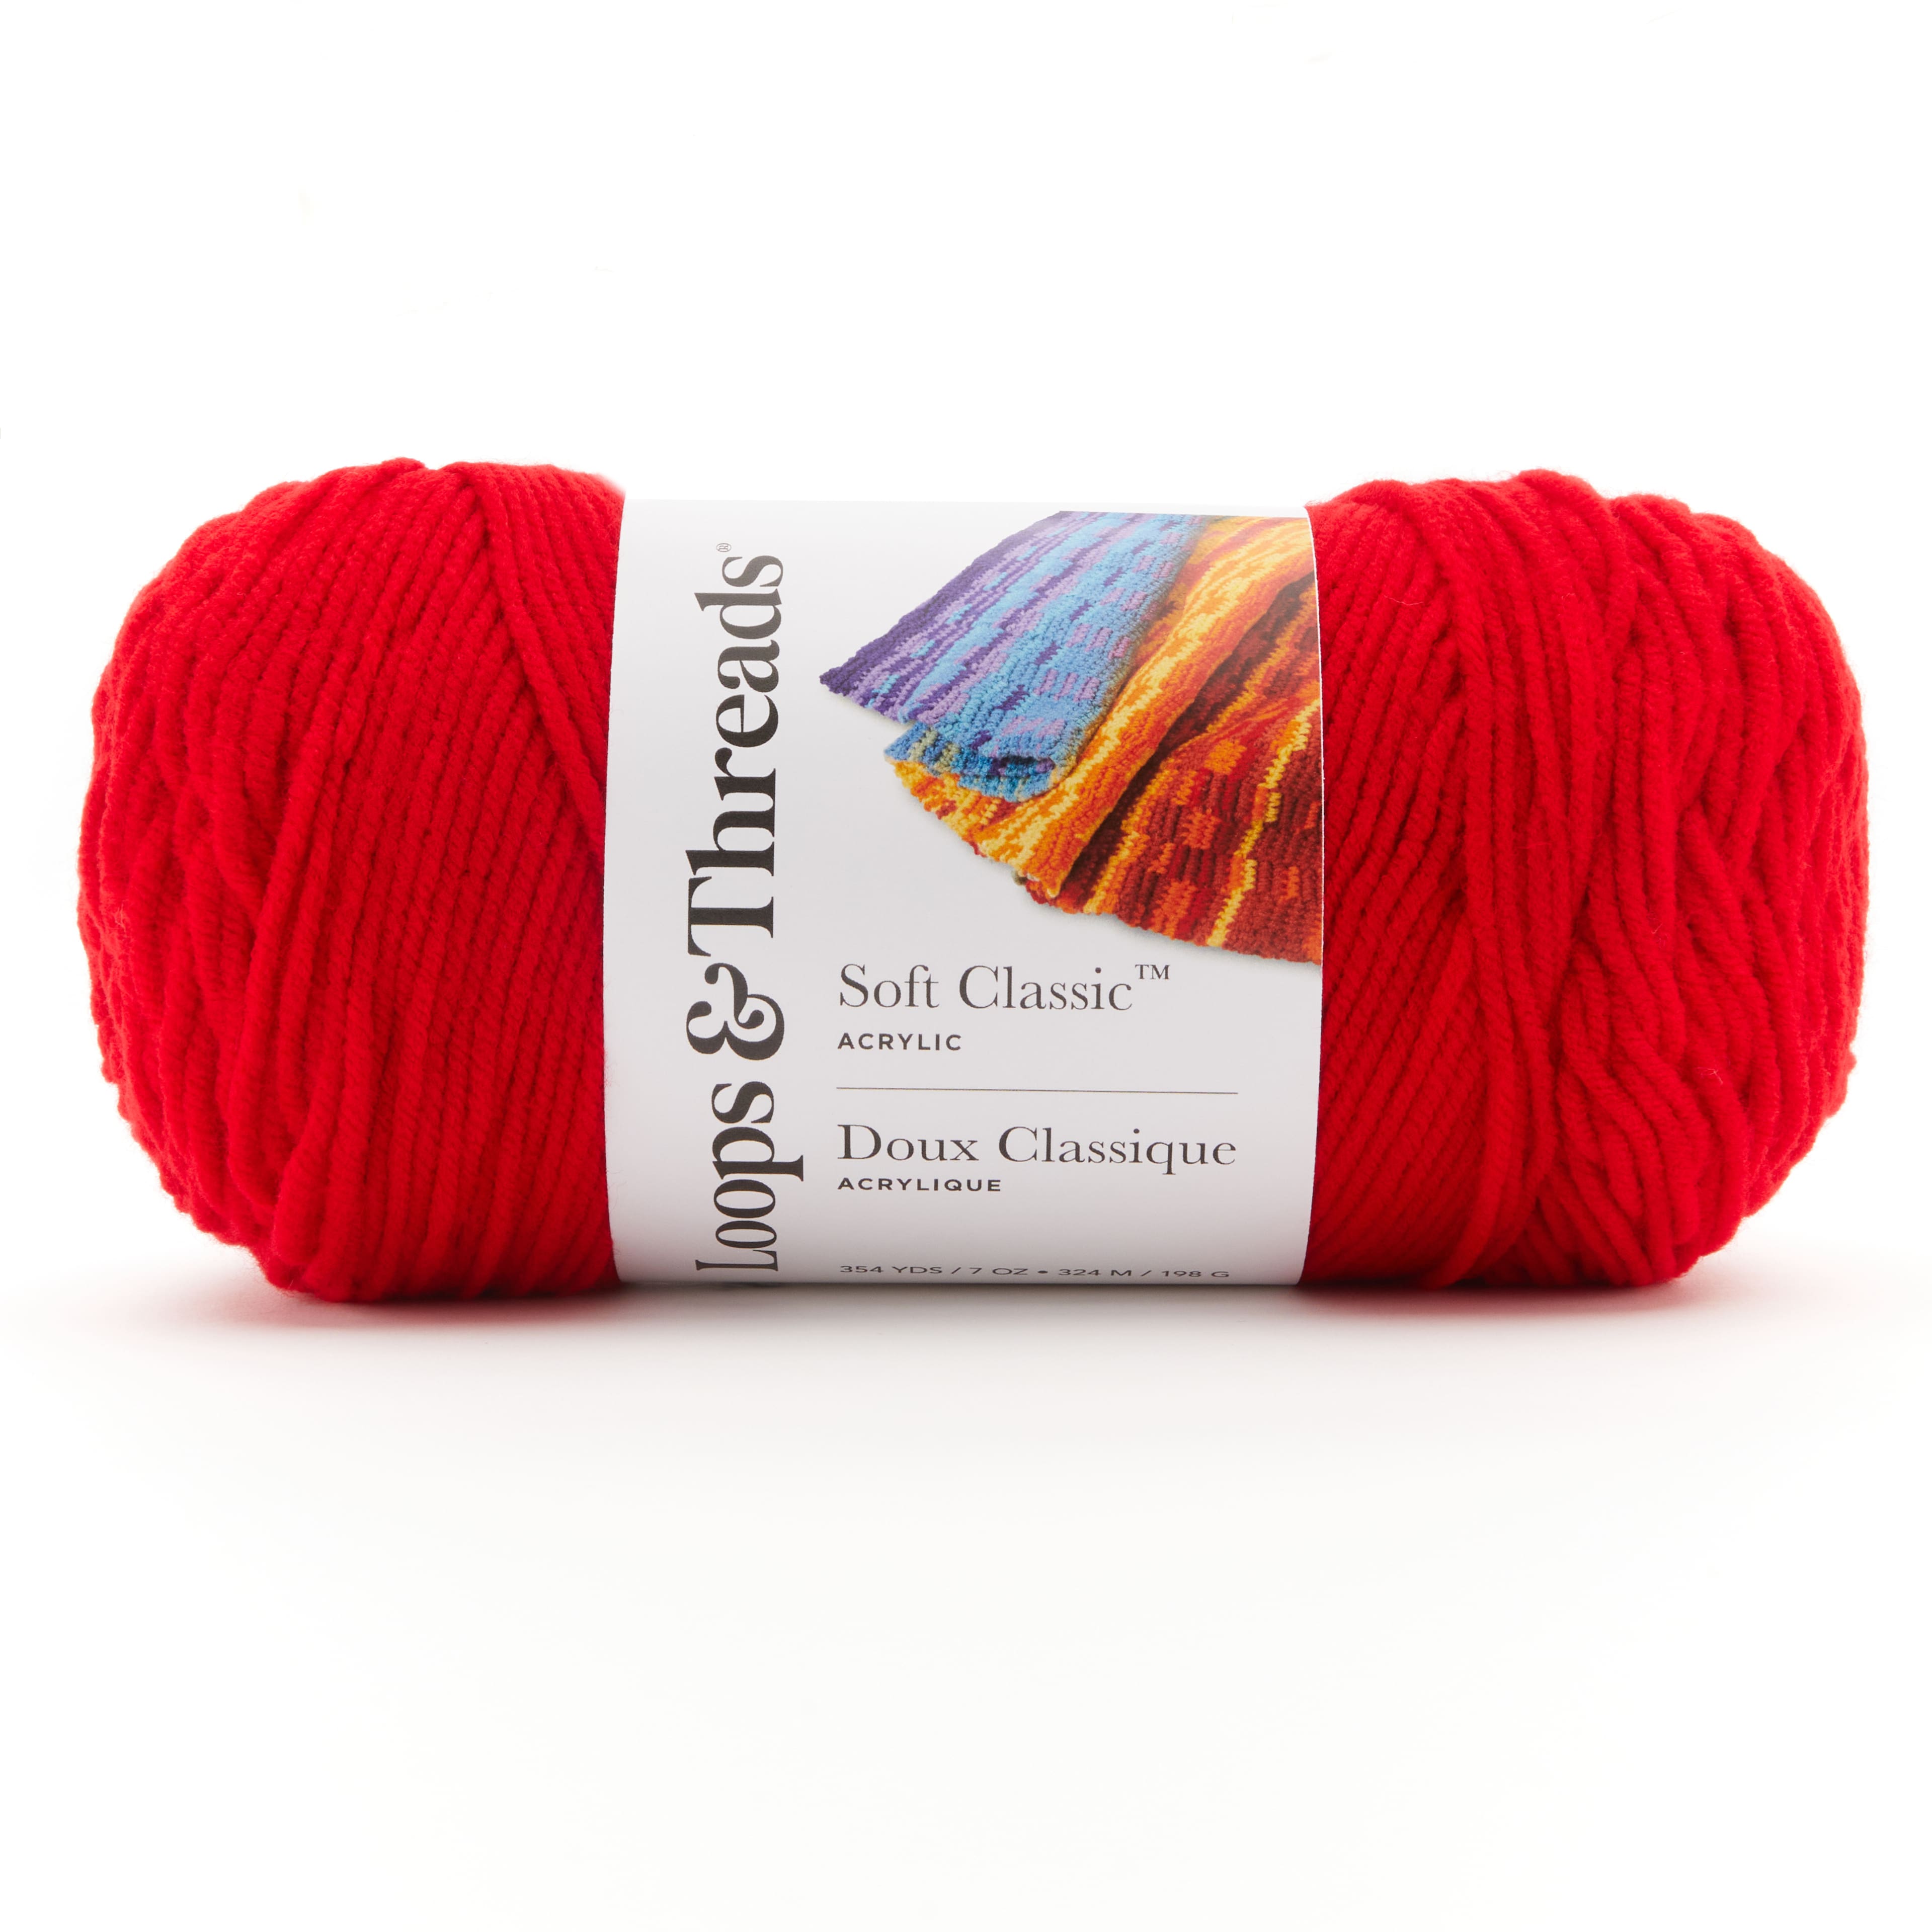 Impeccable® Solid Yarn by Loops & Threads®, Michaels